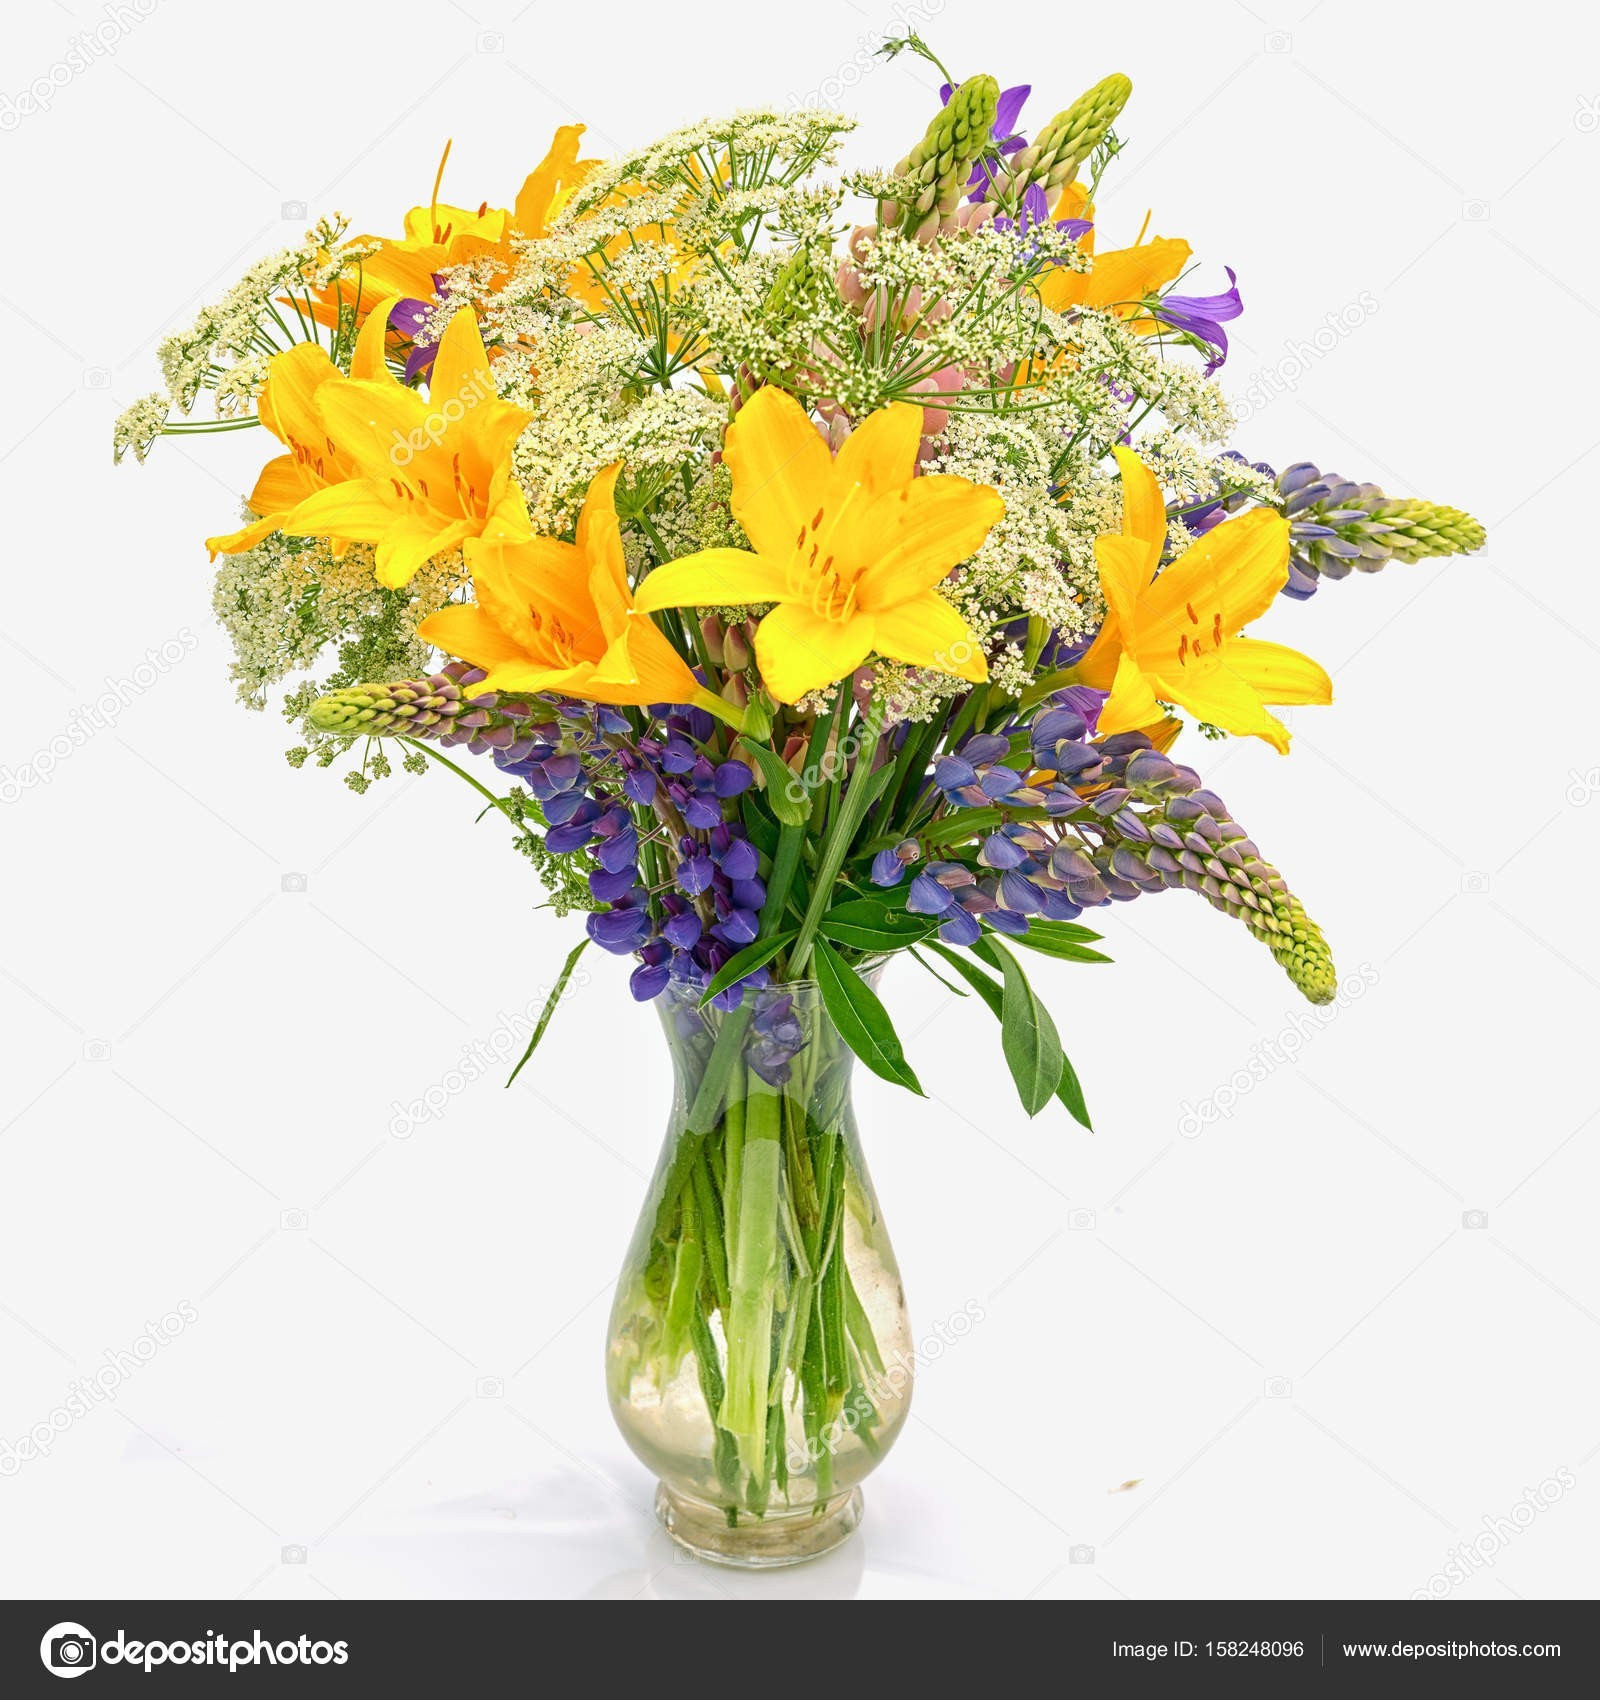 17 Recommended Yellow Flowers In Vase Painting 2024 free download yellow flowers in vase painting of life flowers flower nature pictures best of flowers within life flowers flower nature pictures luxury 16 fresh vase roses still glass bouquet life yellow f